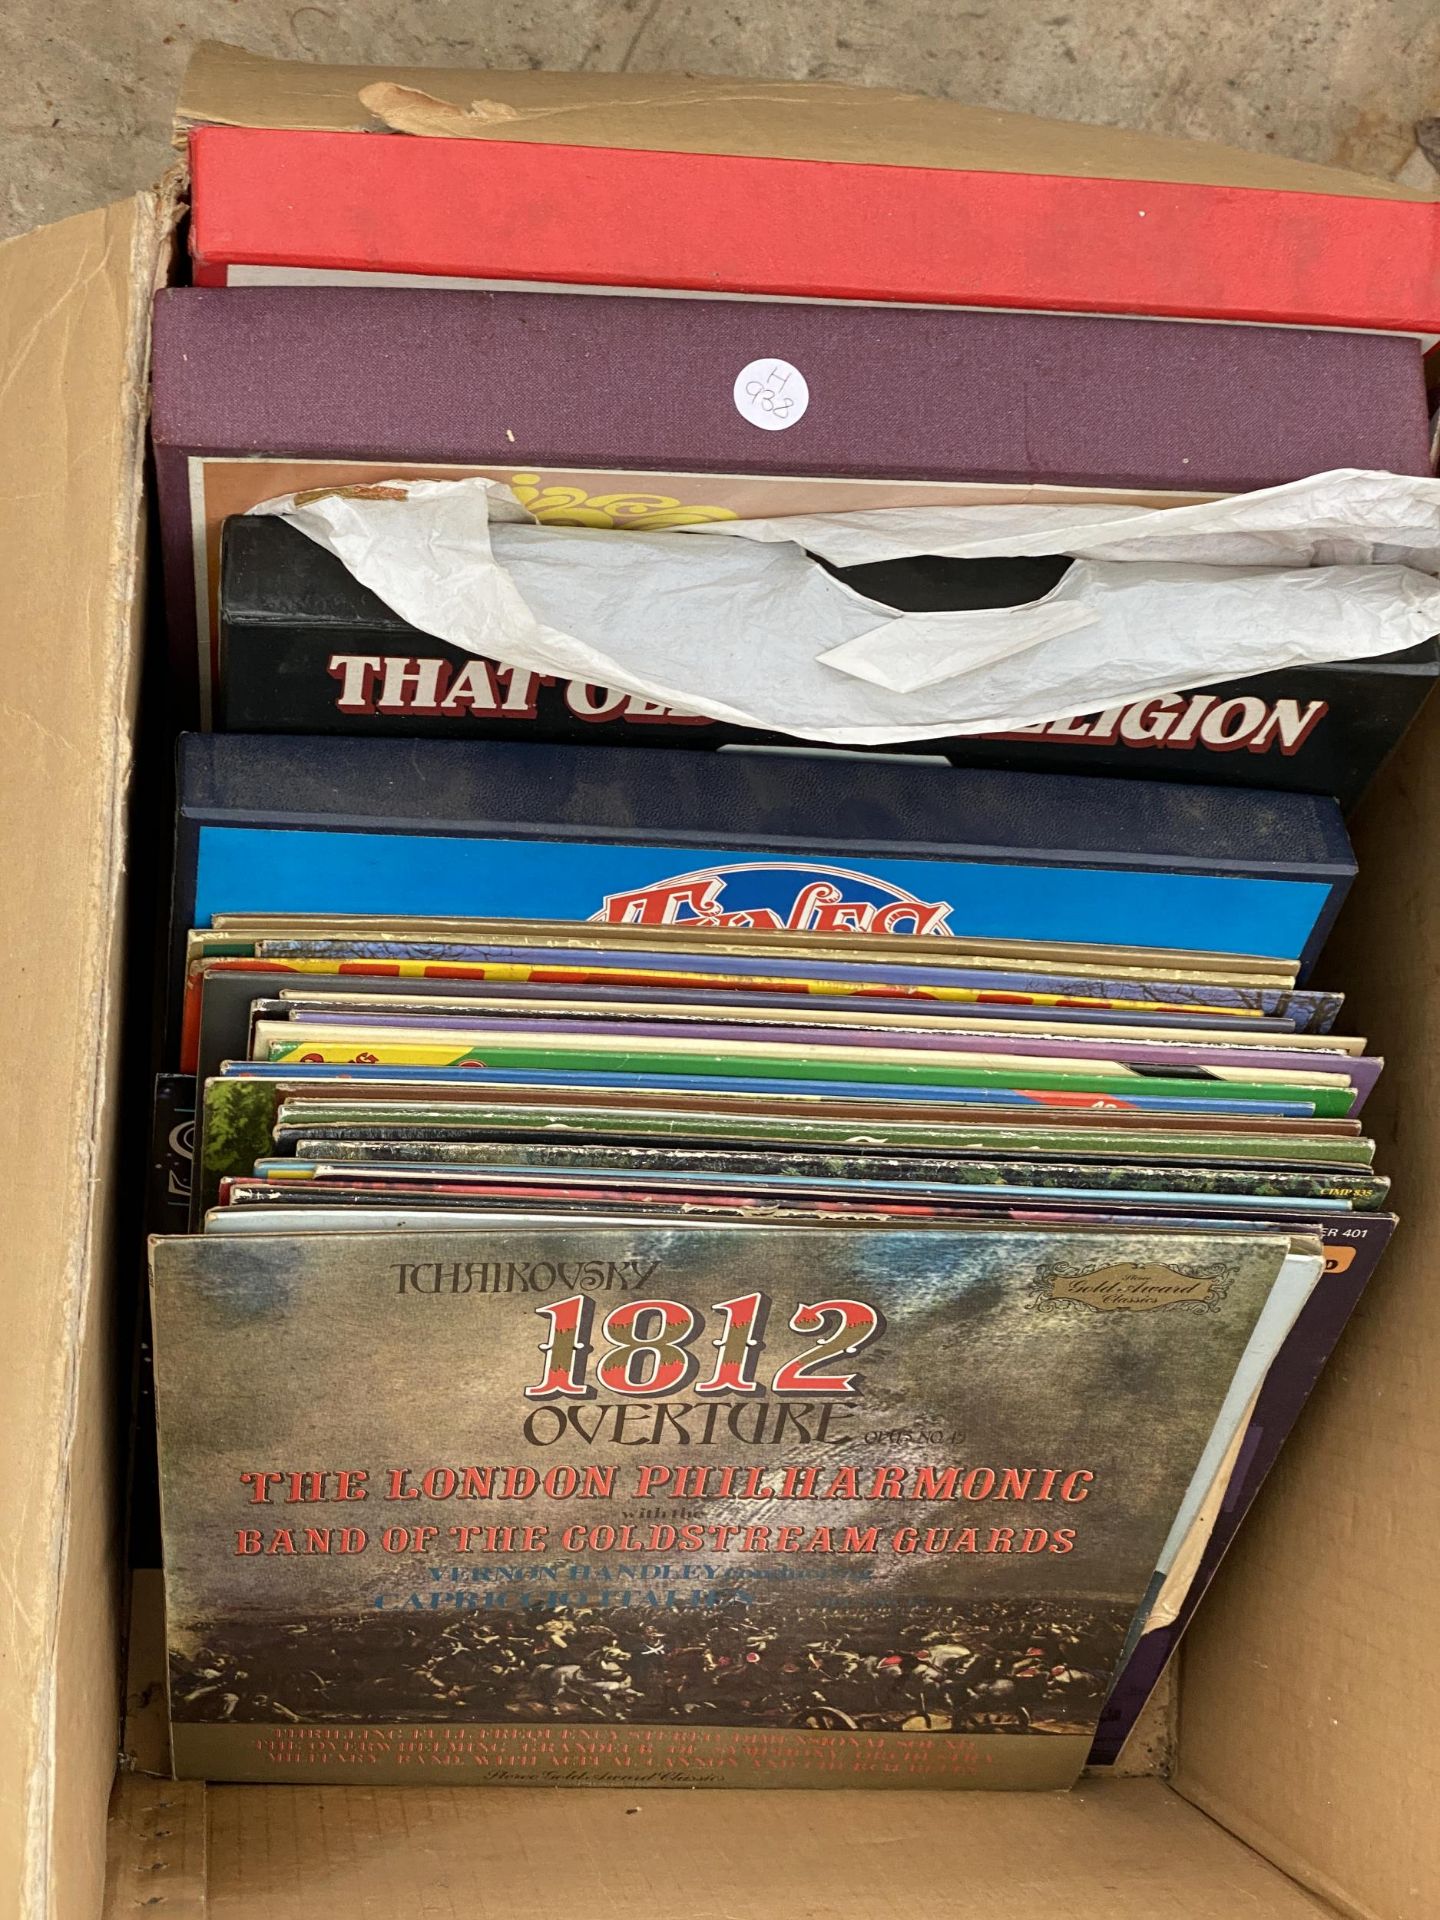 AN ASSORTMENT OF VINTAGE LP RECORDS - Image 2 of 2